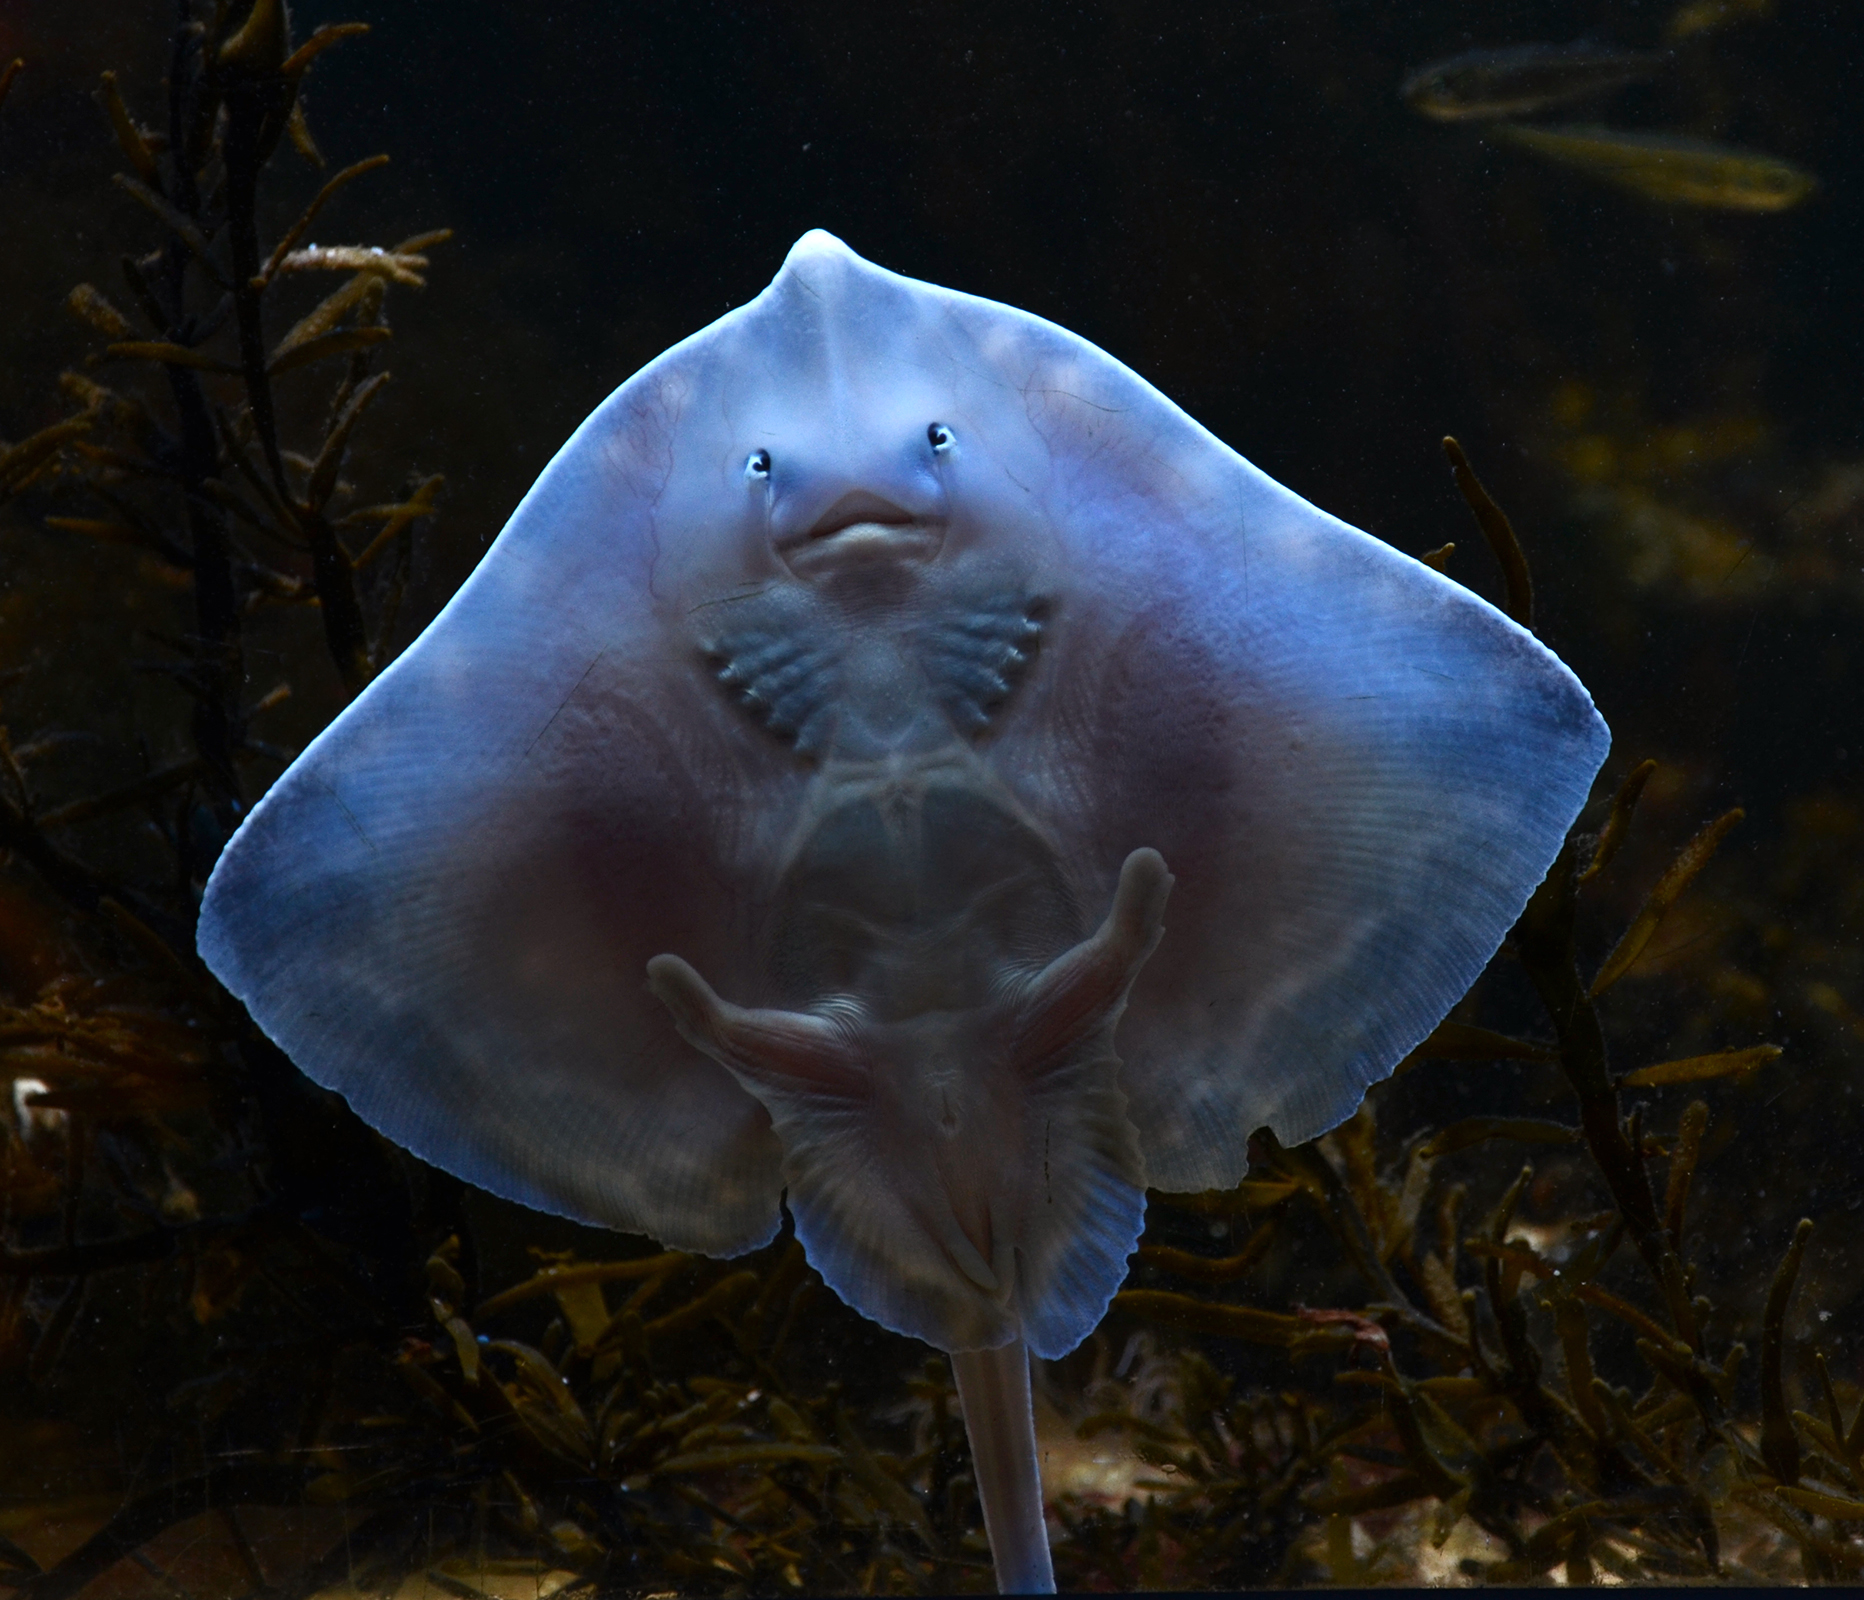 A thornback ray shot from below, showing its pale, translucent underside and strangely human-like eyes and mouth.